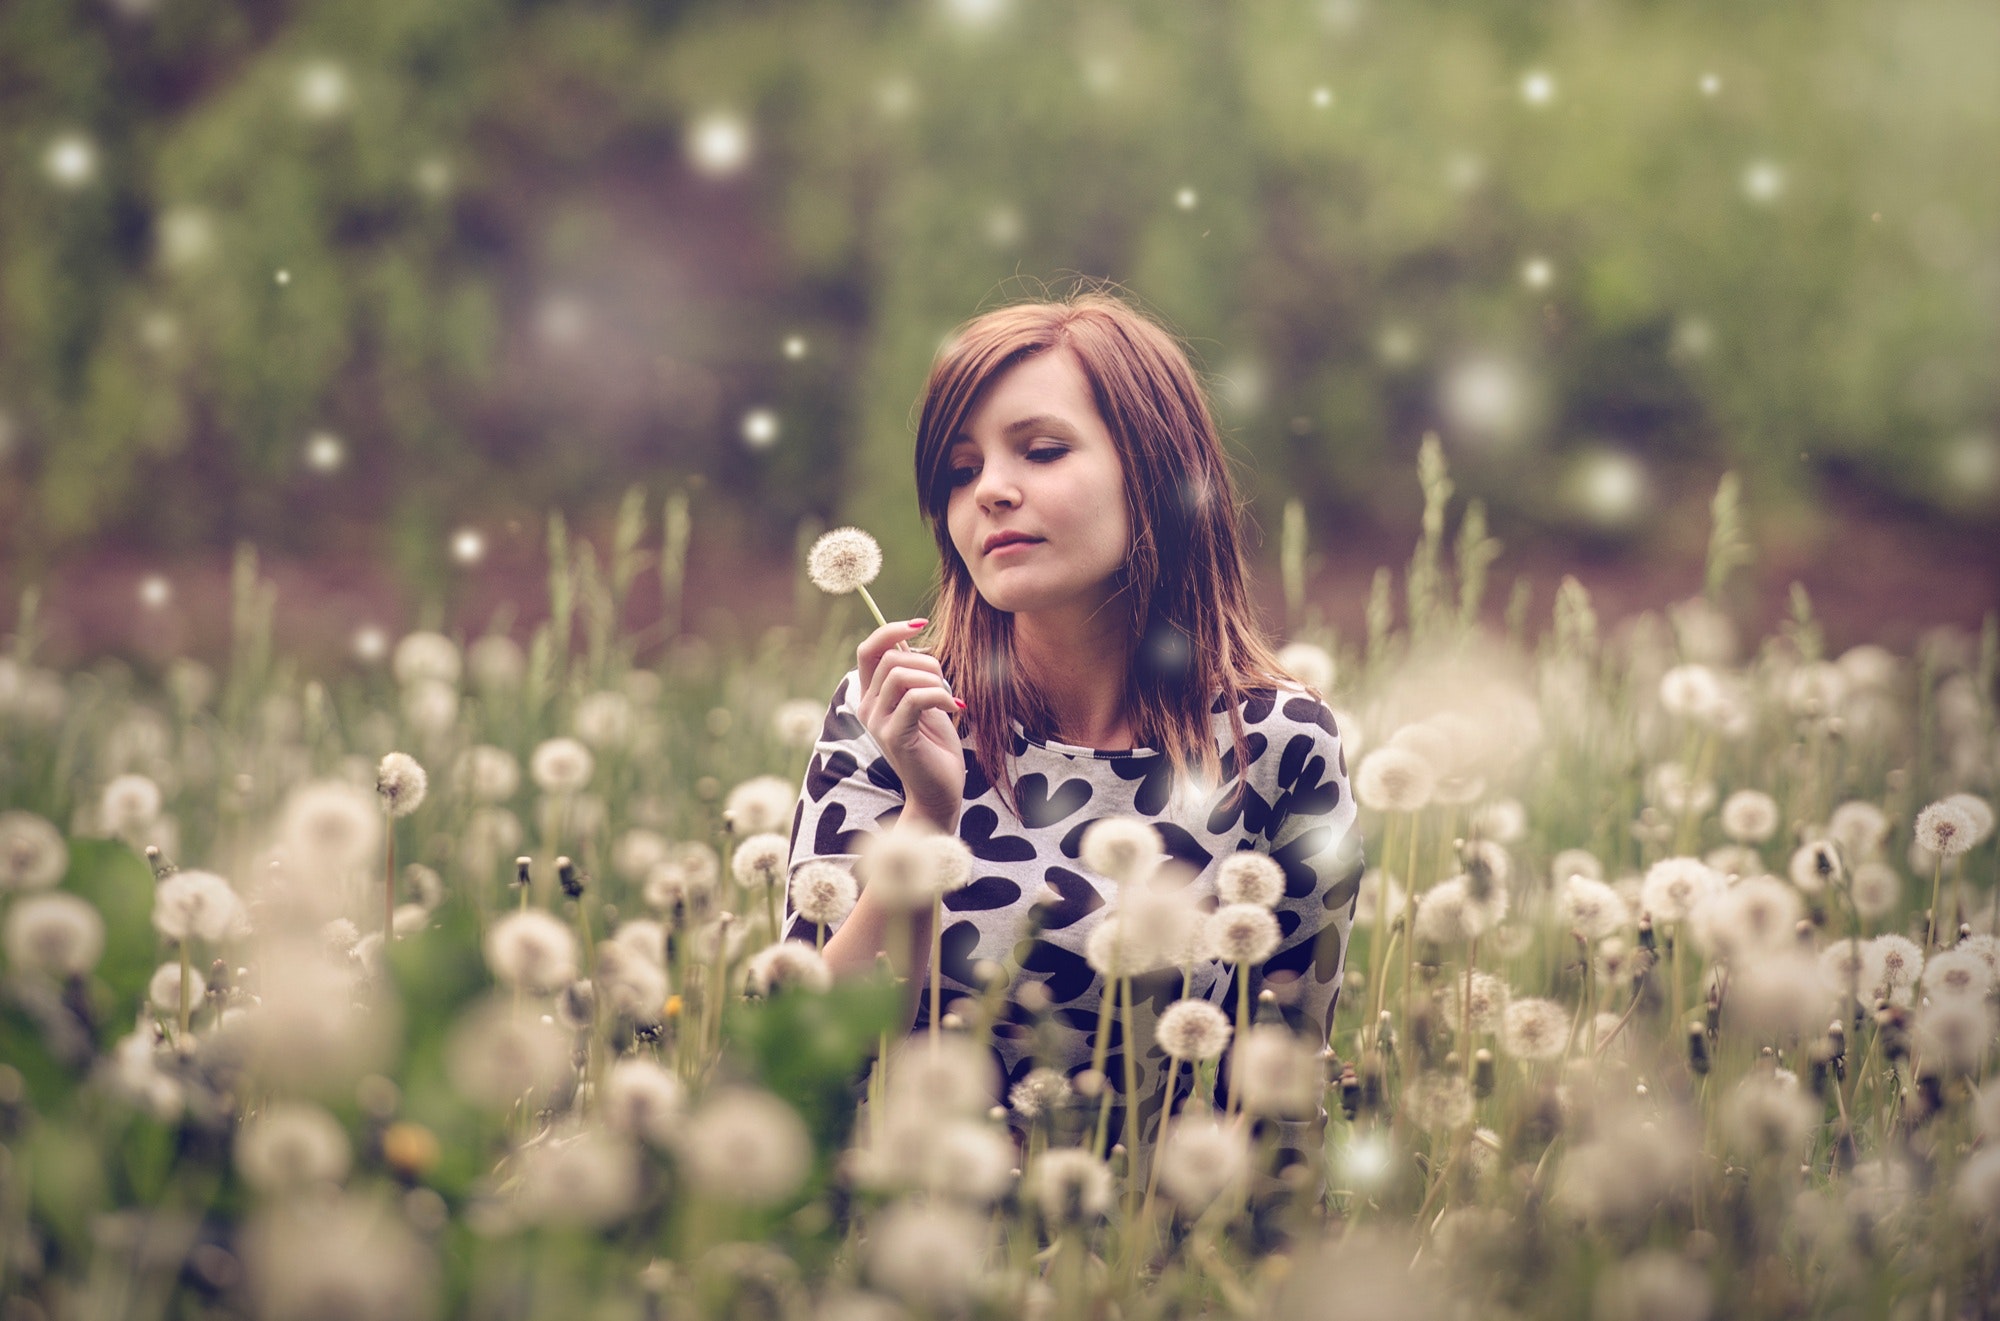 Woman with Dandelions